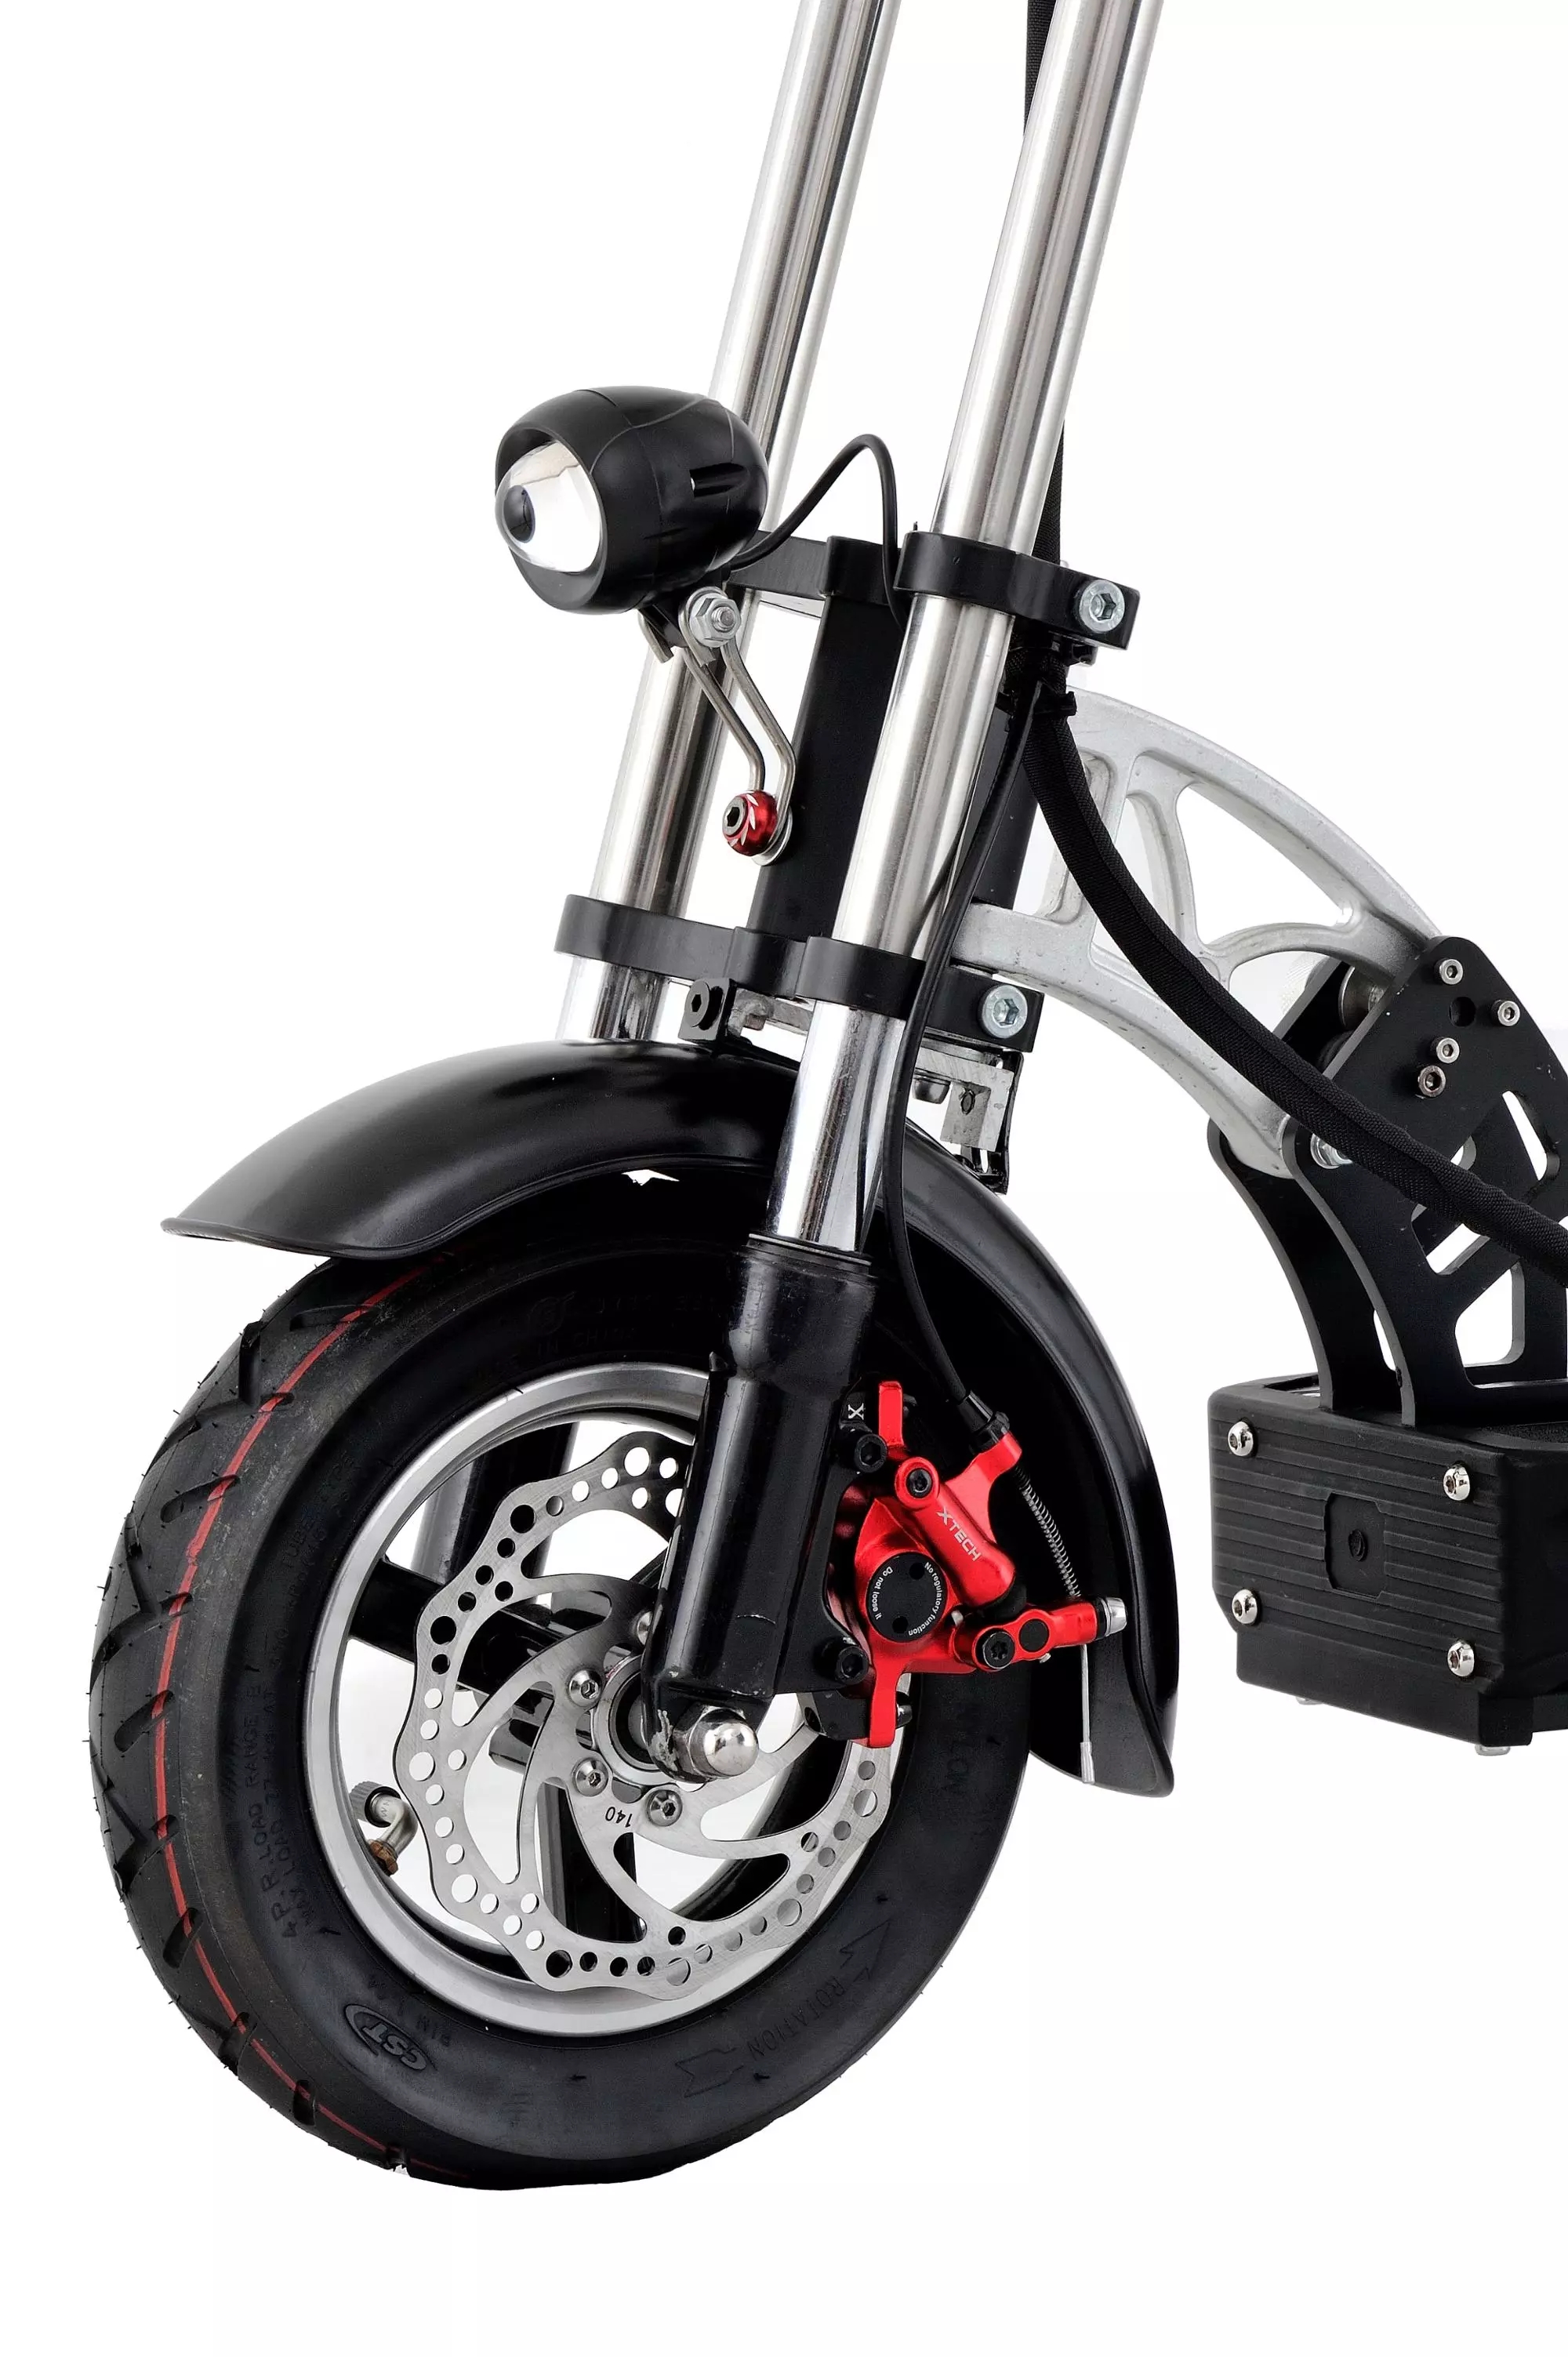 600w electric vehicle folding adult electric scooter with hub motor